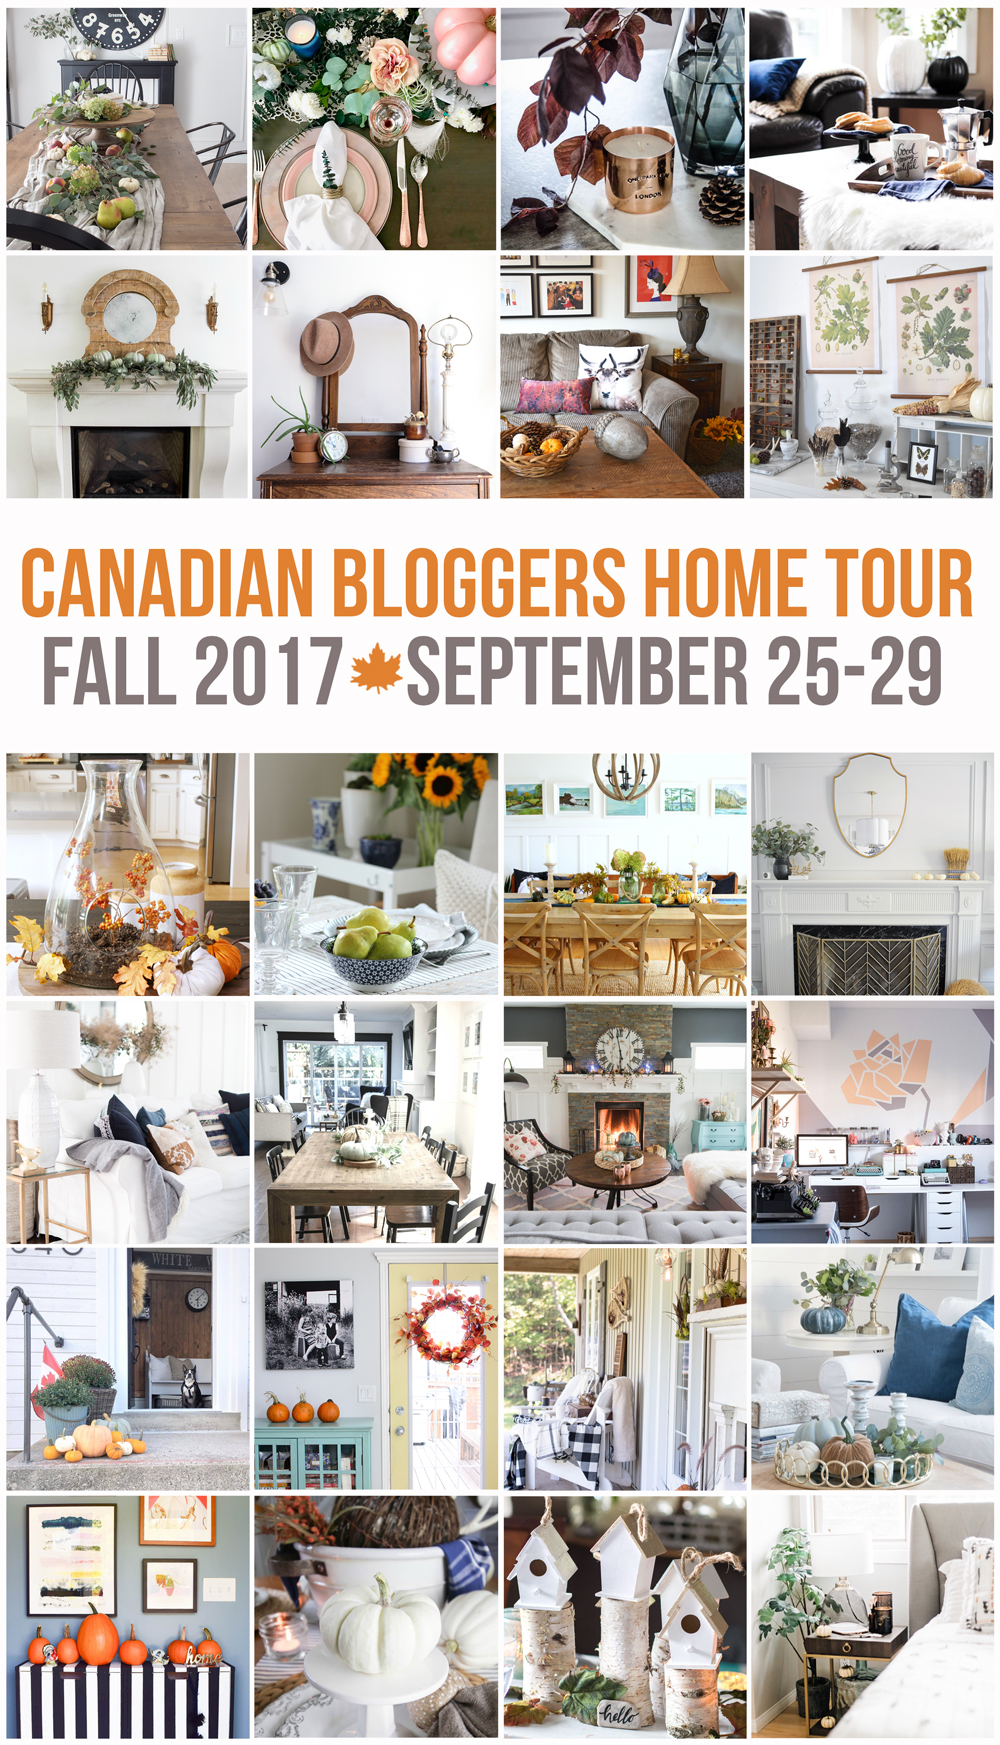 Canadian Bloggers Home Tour poster.